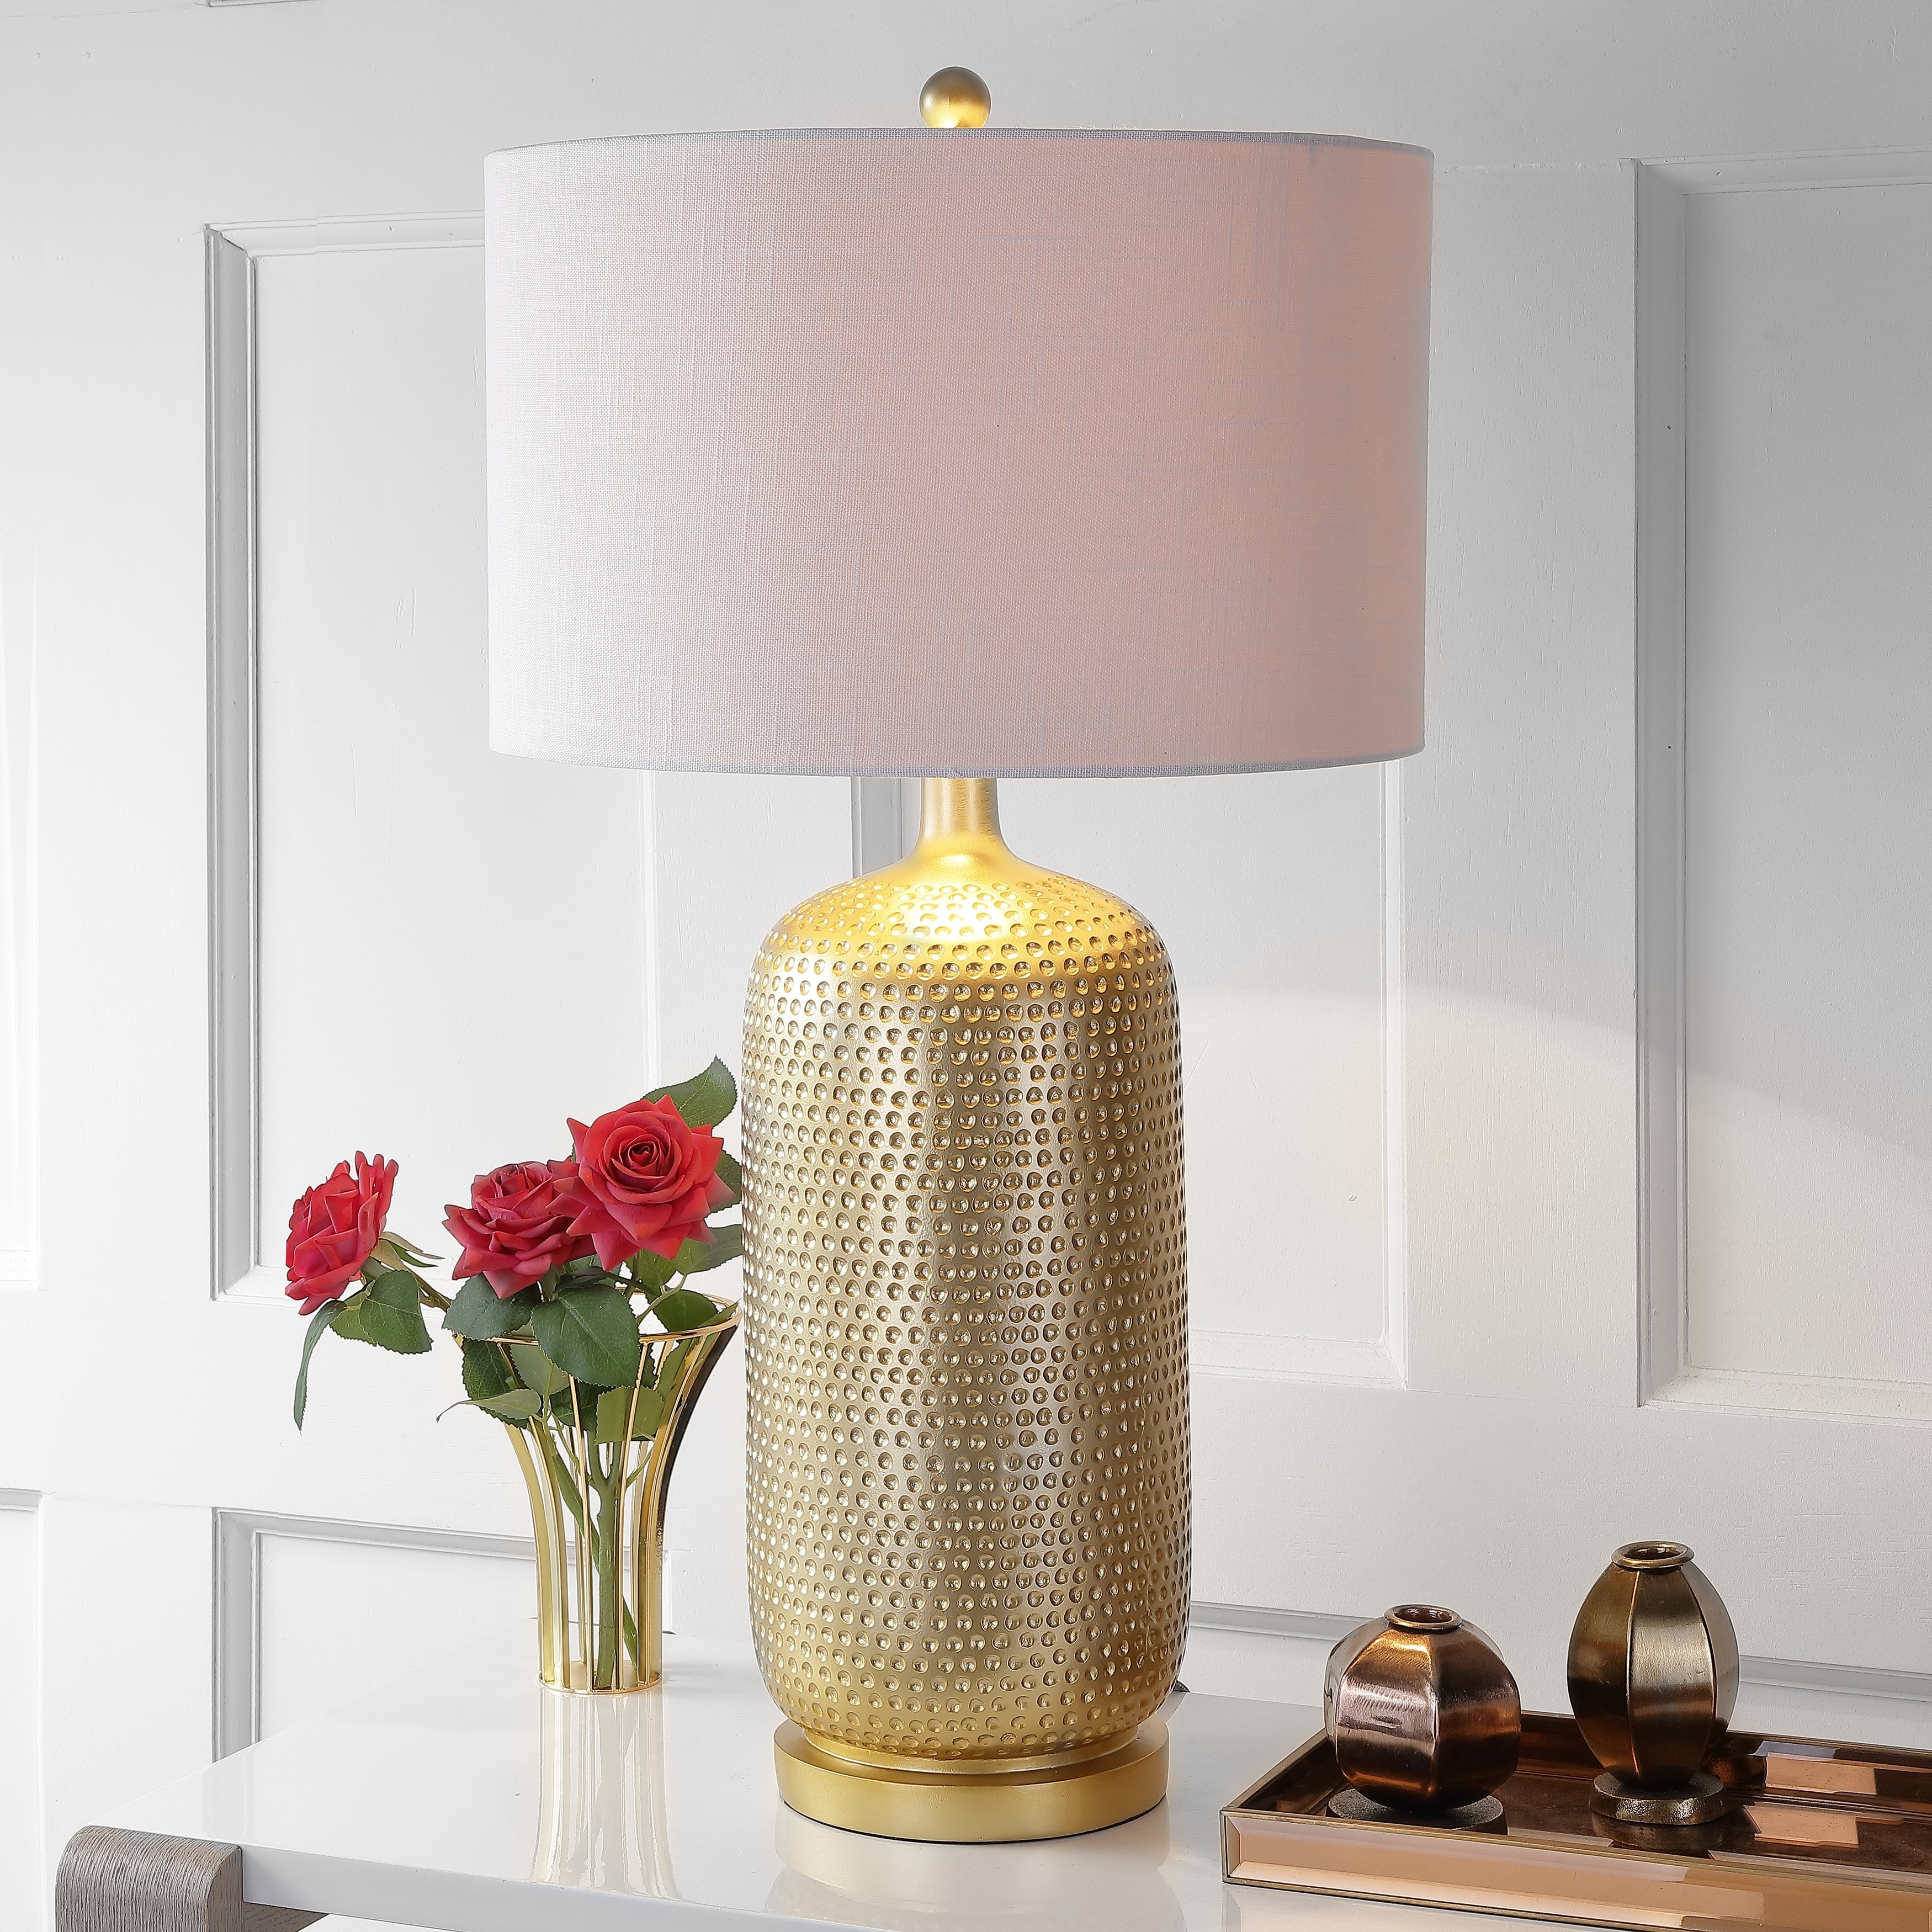 https://ak1.ostkcdn.com/images/products/is/images/direct/4248616da5e8f9ee7a91dffa5ff823c6c309c0e4/Sophia-30%22-Resin-LED-Table-Lamp%2C-Gold-by-JONATHAN-Y.jpg